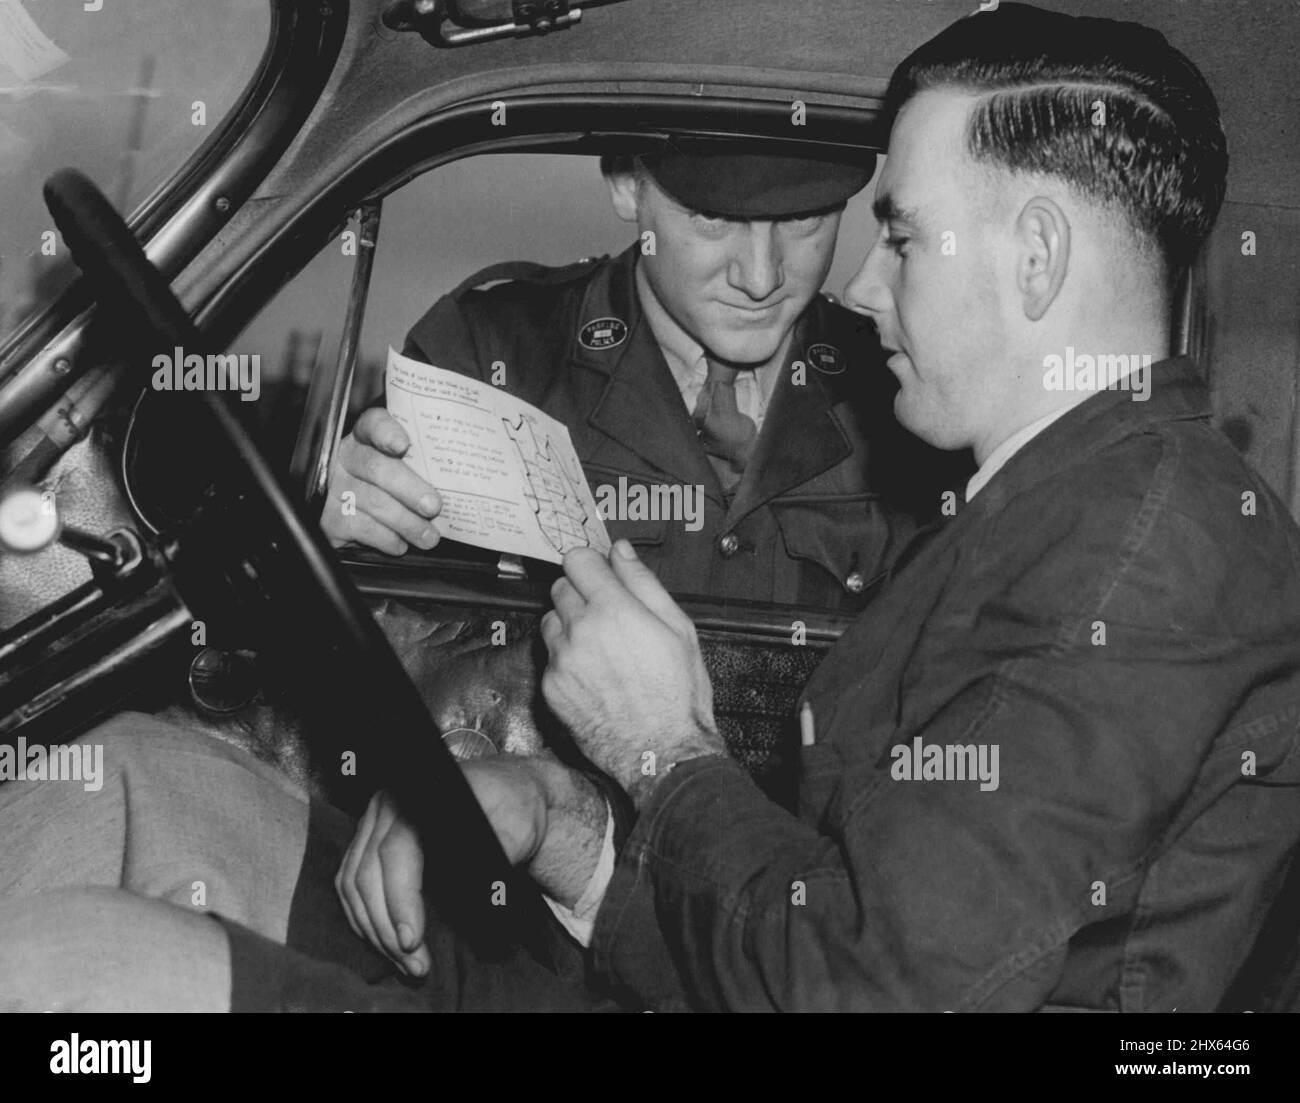 Questionnaire for driver Traffic officer hands this car driver a card on which he must detail his movements by car during the day. May 23, 1947. Stock Photo